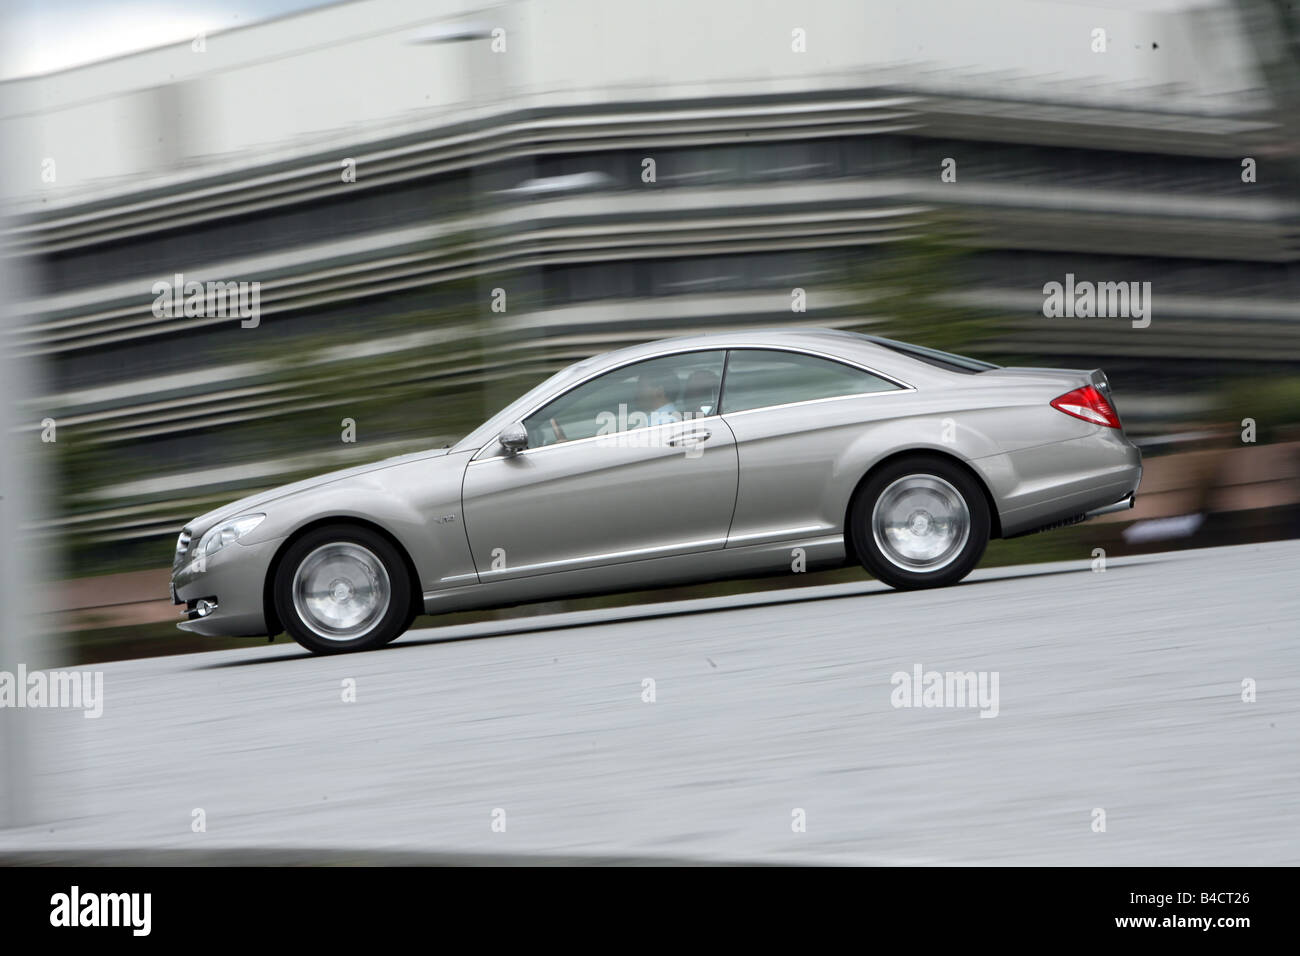 Mercedes CL 600, model year 2006-, silver, driving, side view, City Stock Photo